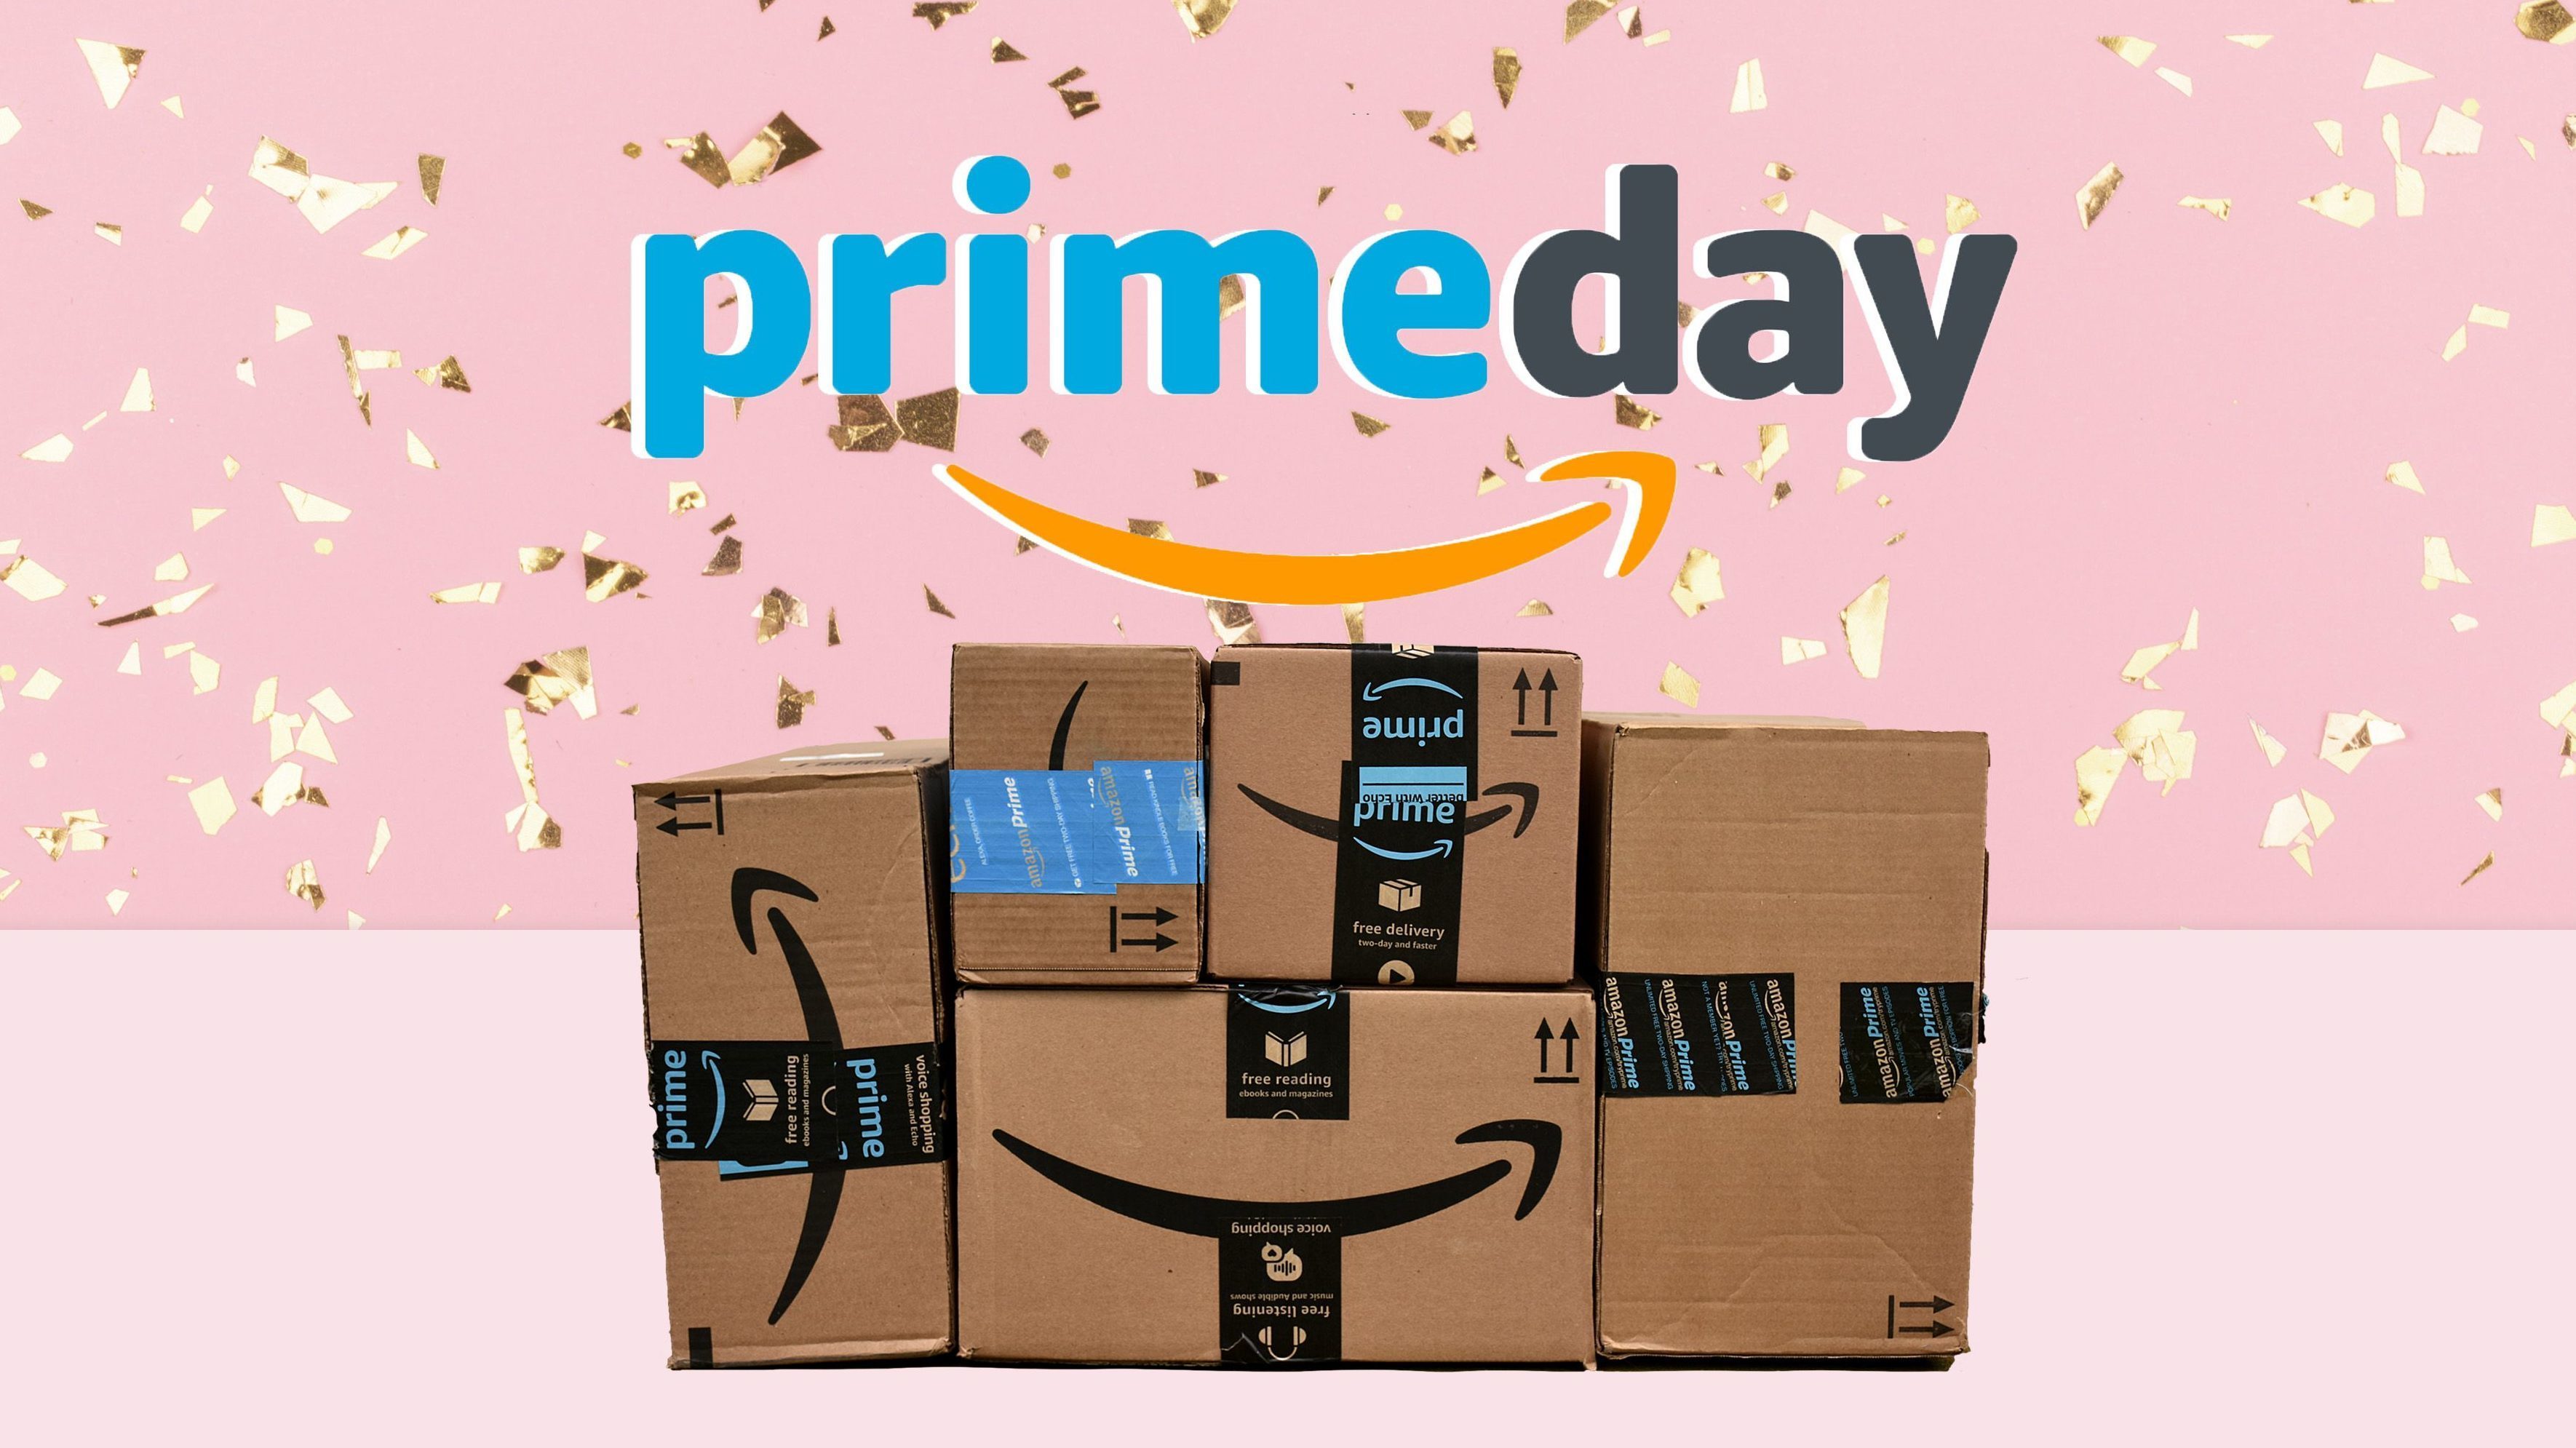 Amazon Prime day sale starting 15th july for 48 ,hours